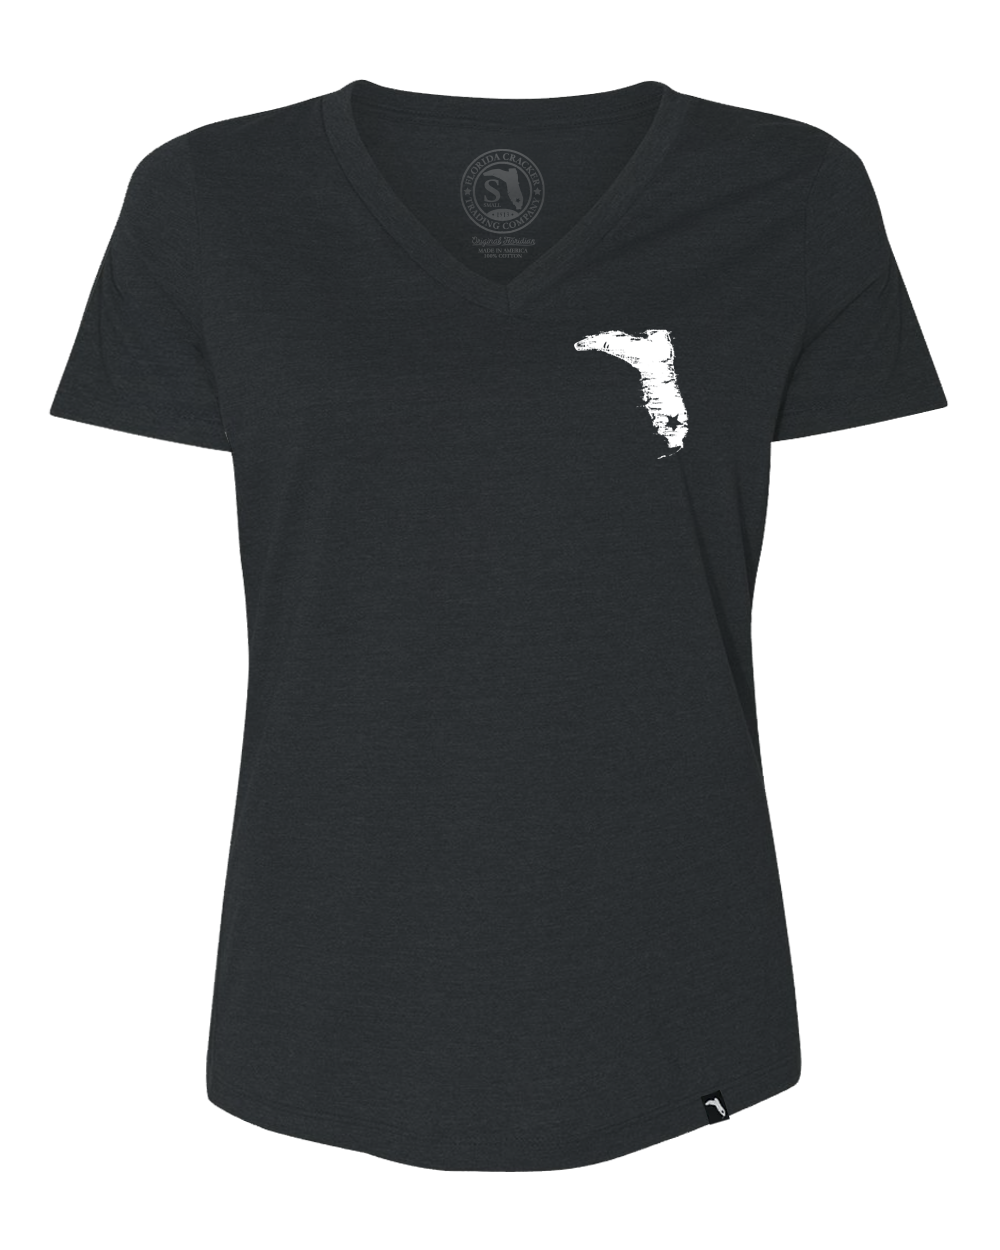 LADIES BOOT V-NECK - HEATHER CHARCOAL